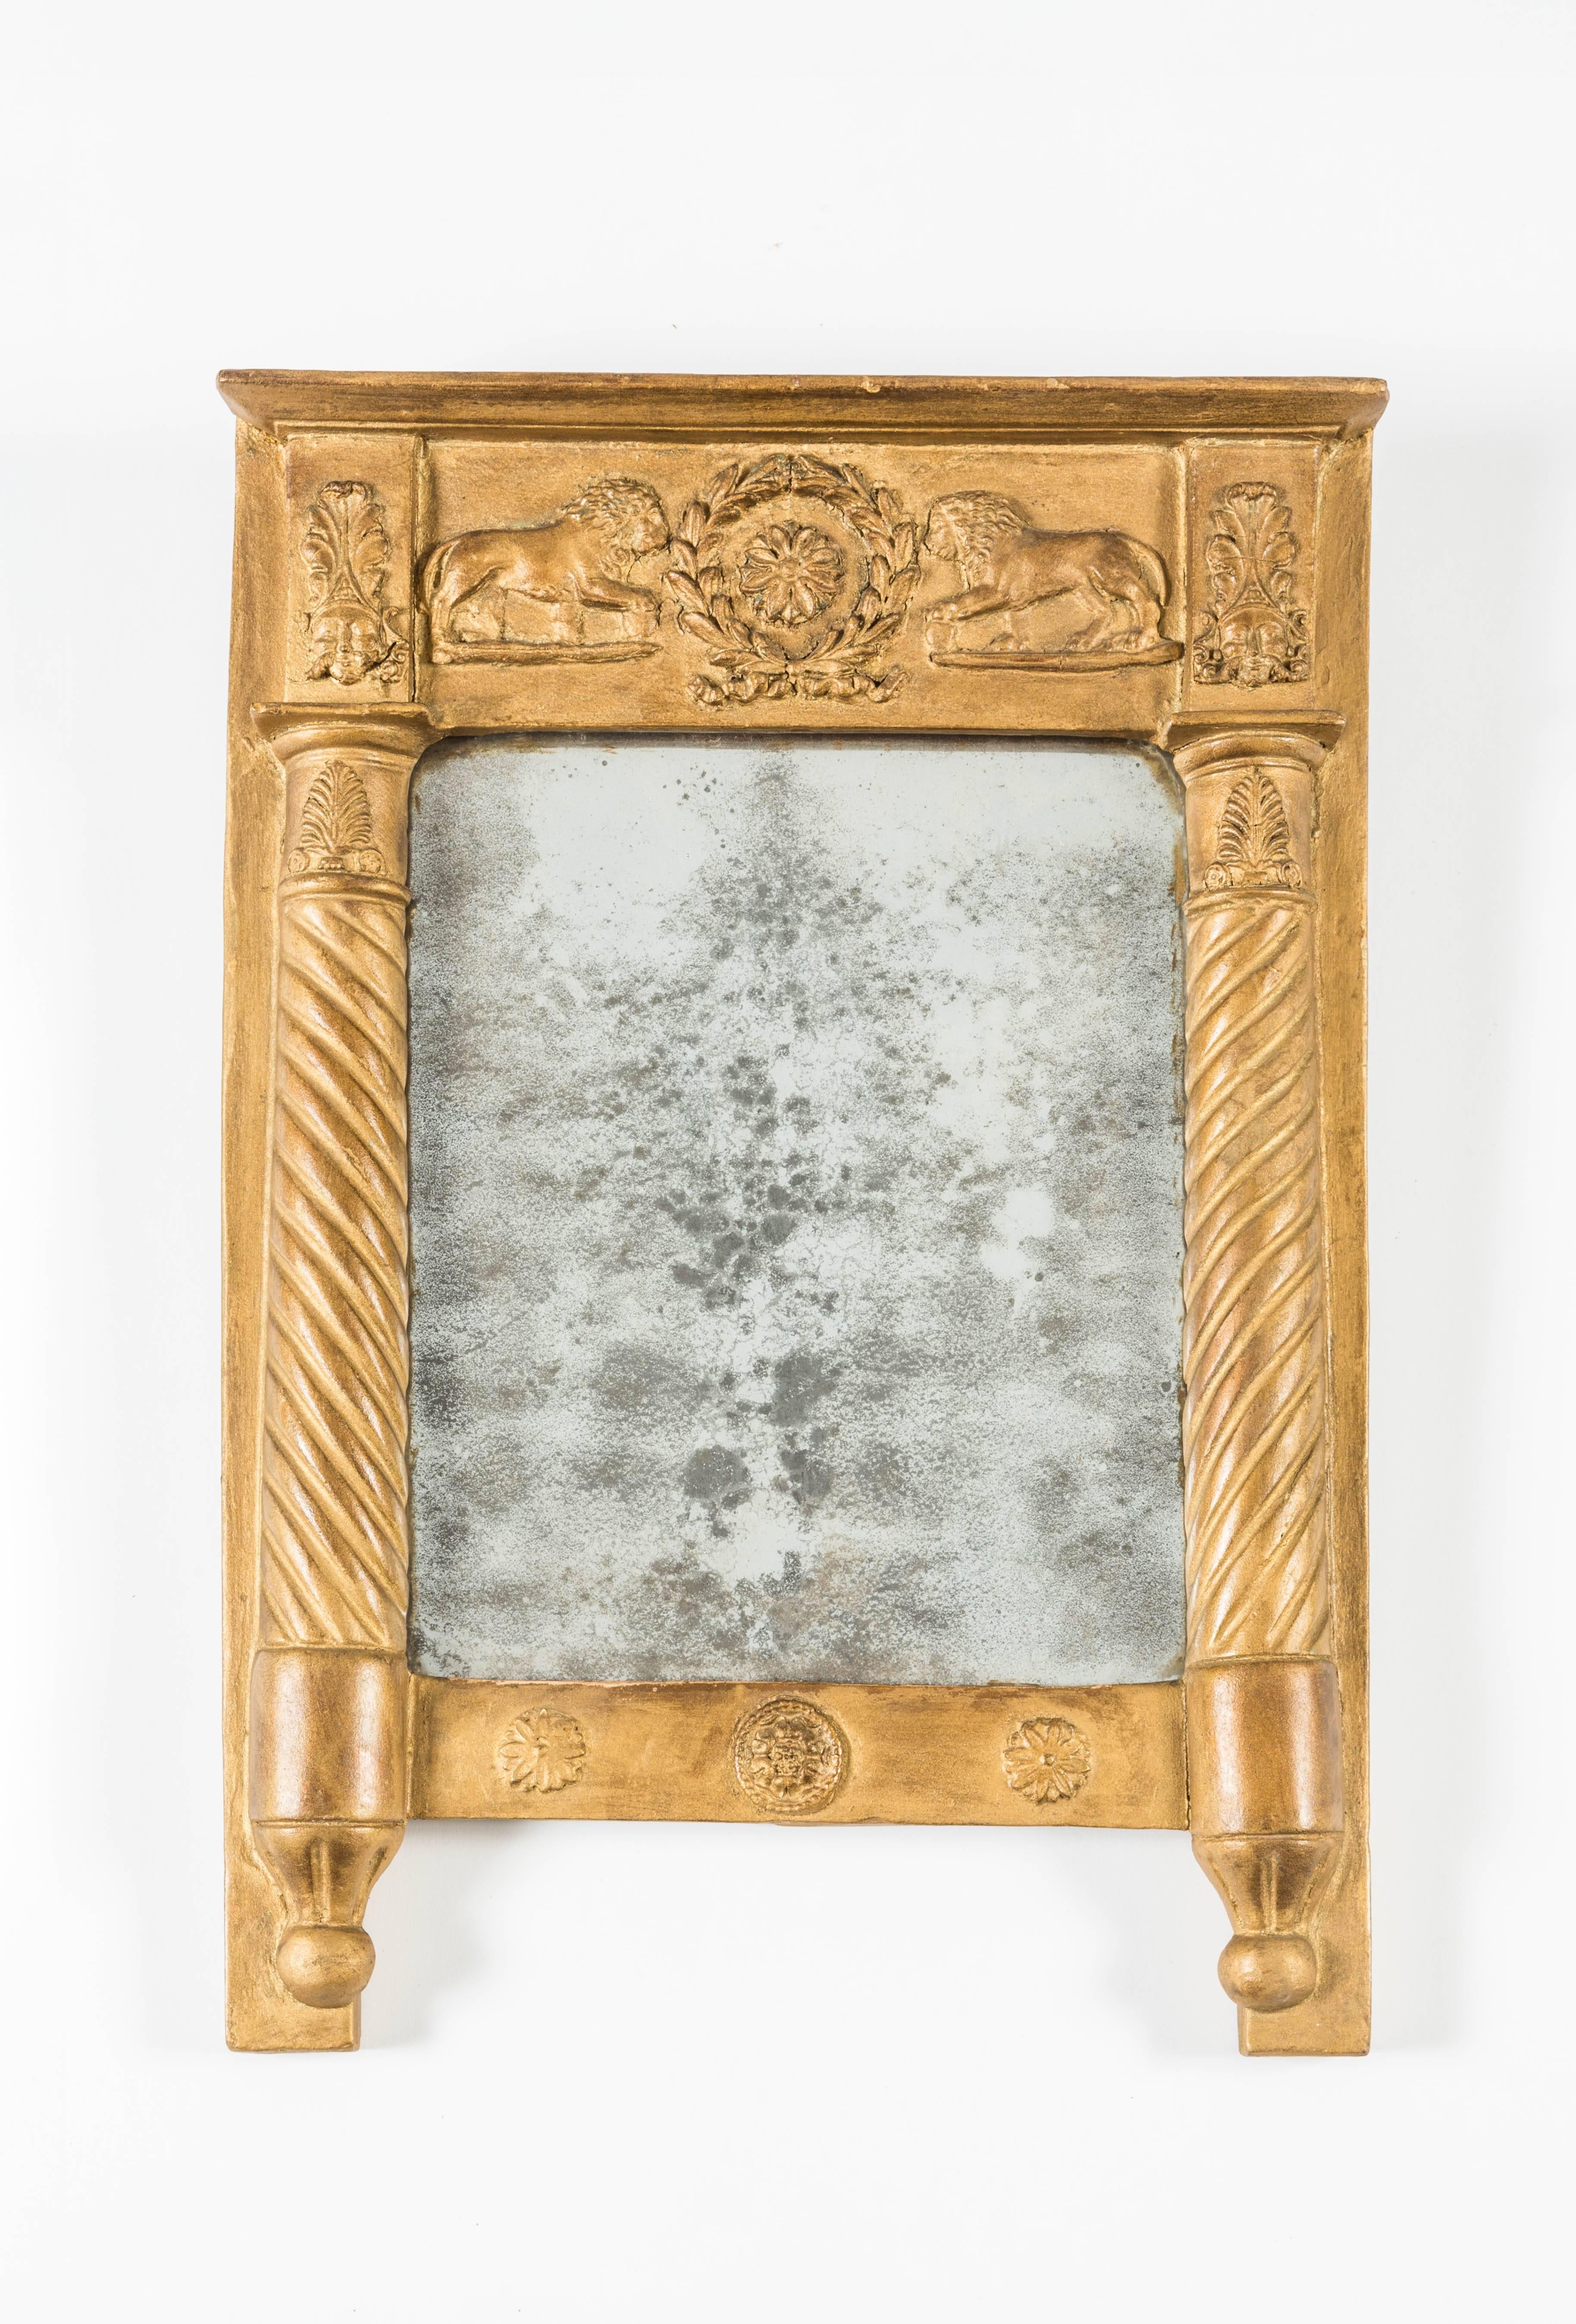 Small, exquisite french mirror, with original mercury glass.
